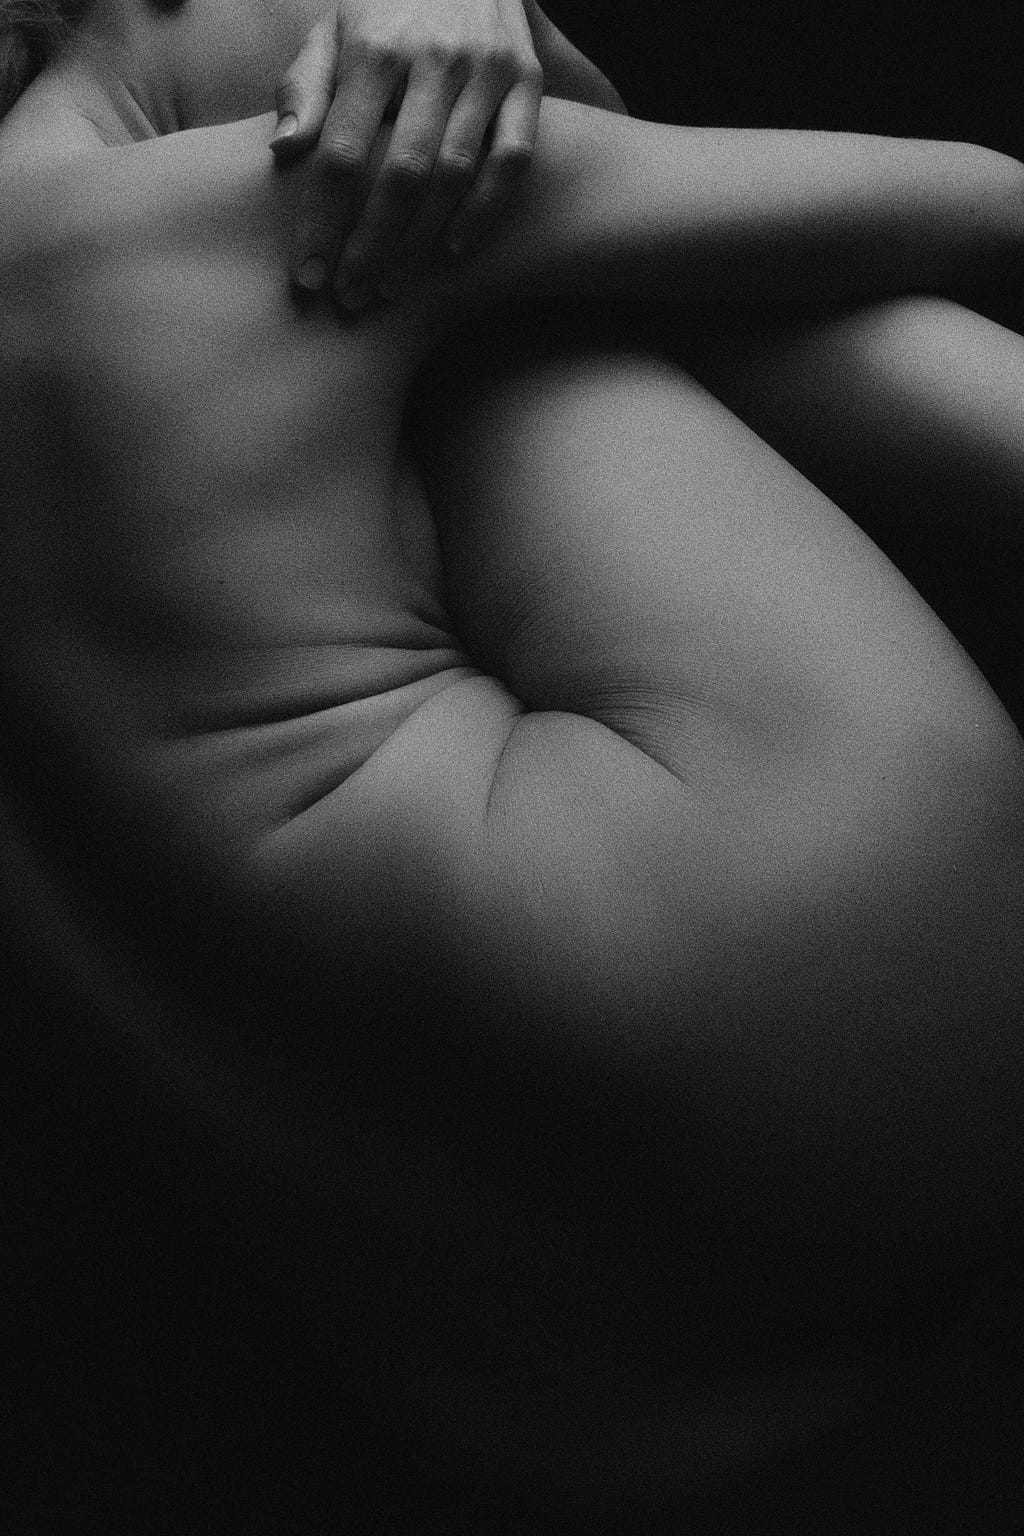 A black and white photo of a naked body curled up in a ball